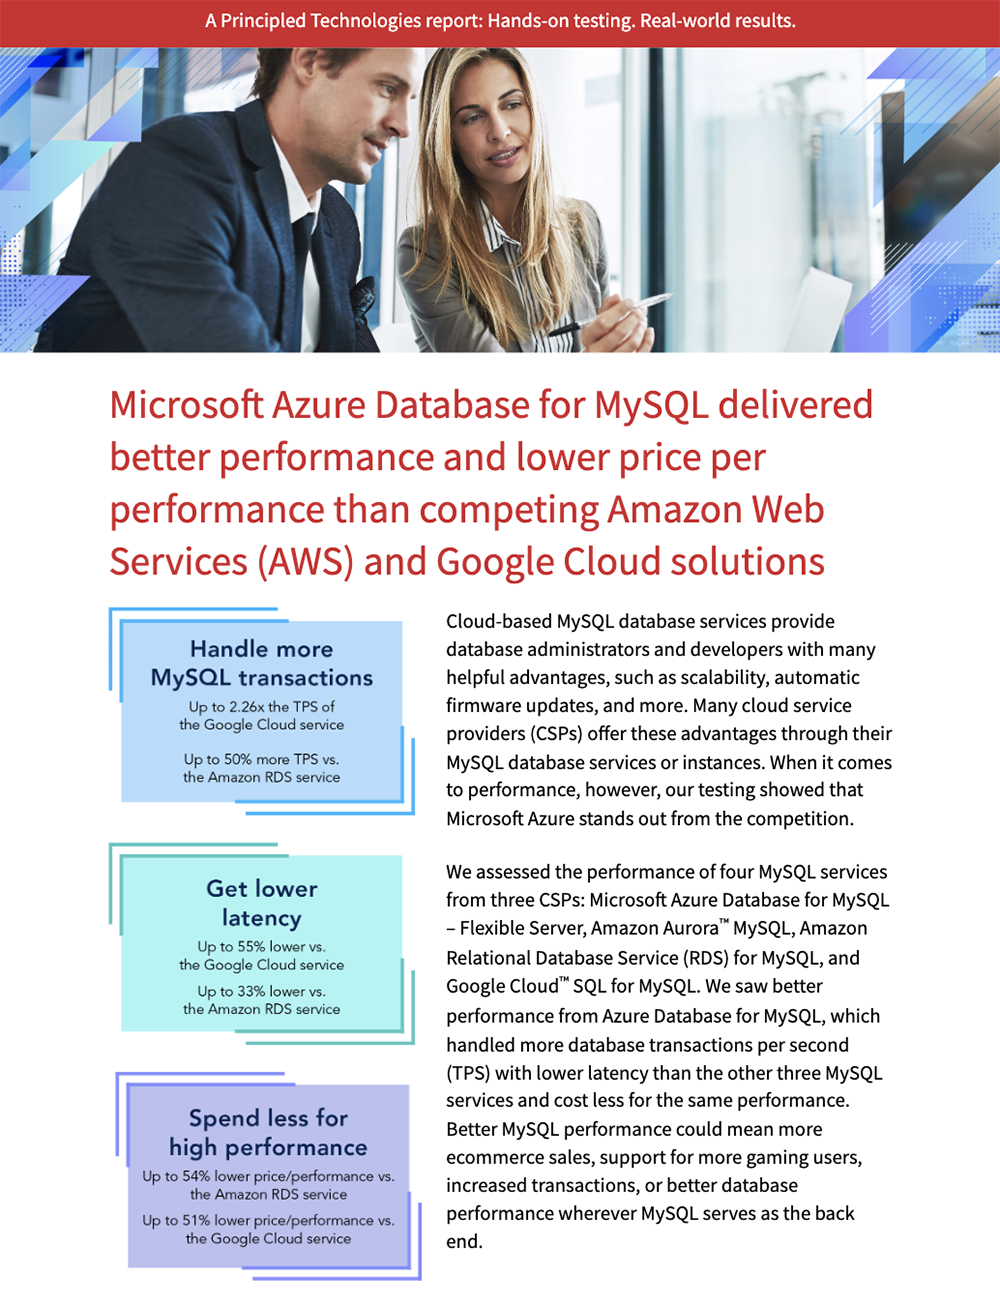  Microsoft Azure Database for MySQL delivered better performance and lower price per performance than competing Amazon Web Services (AWS) and Google Cloud solutions